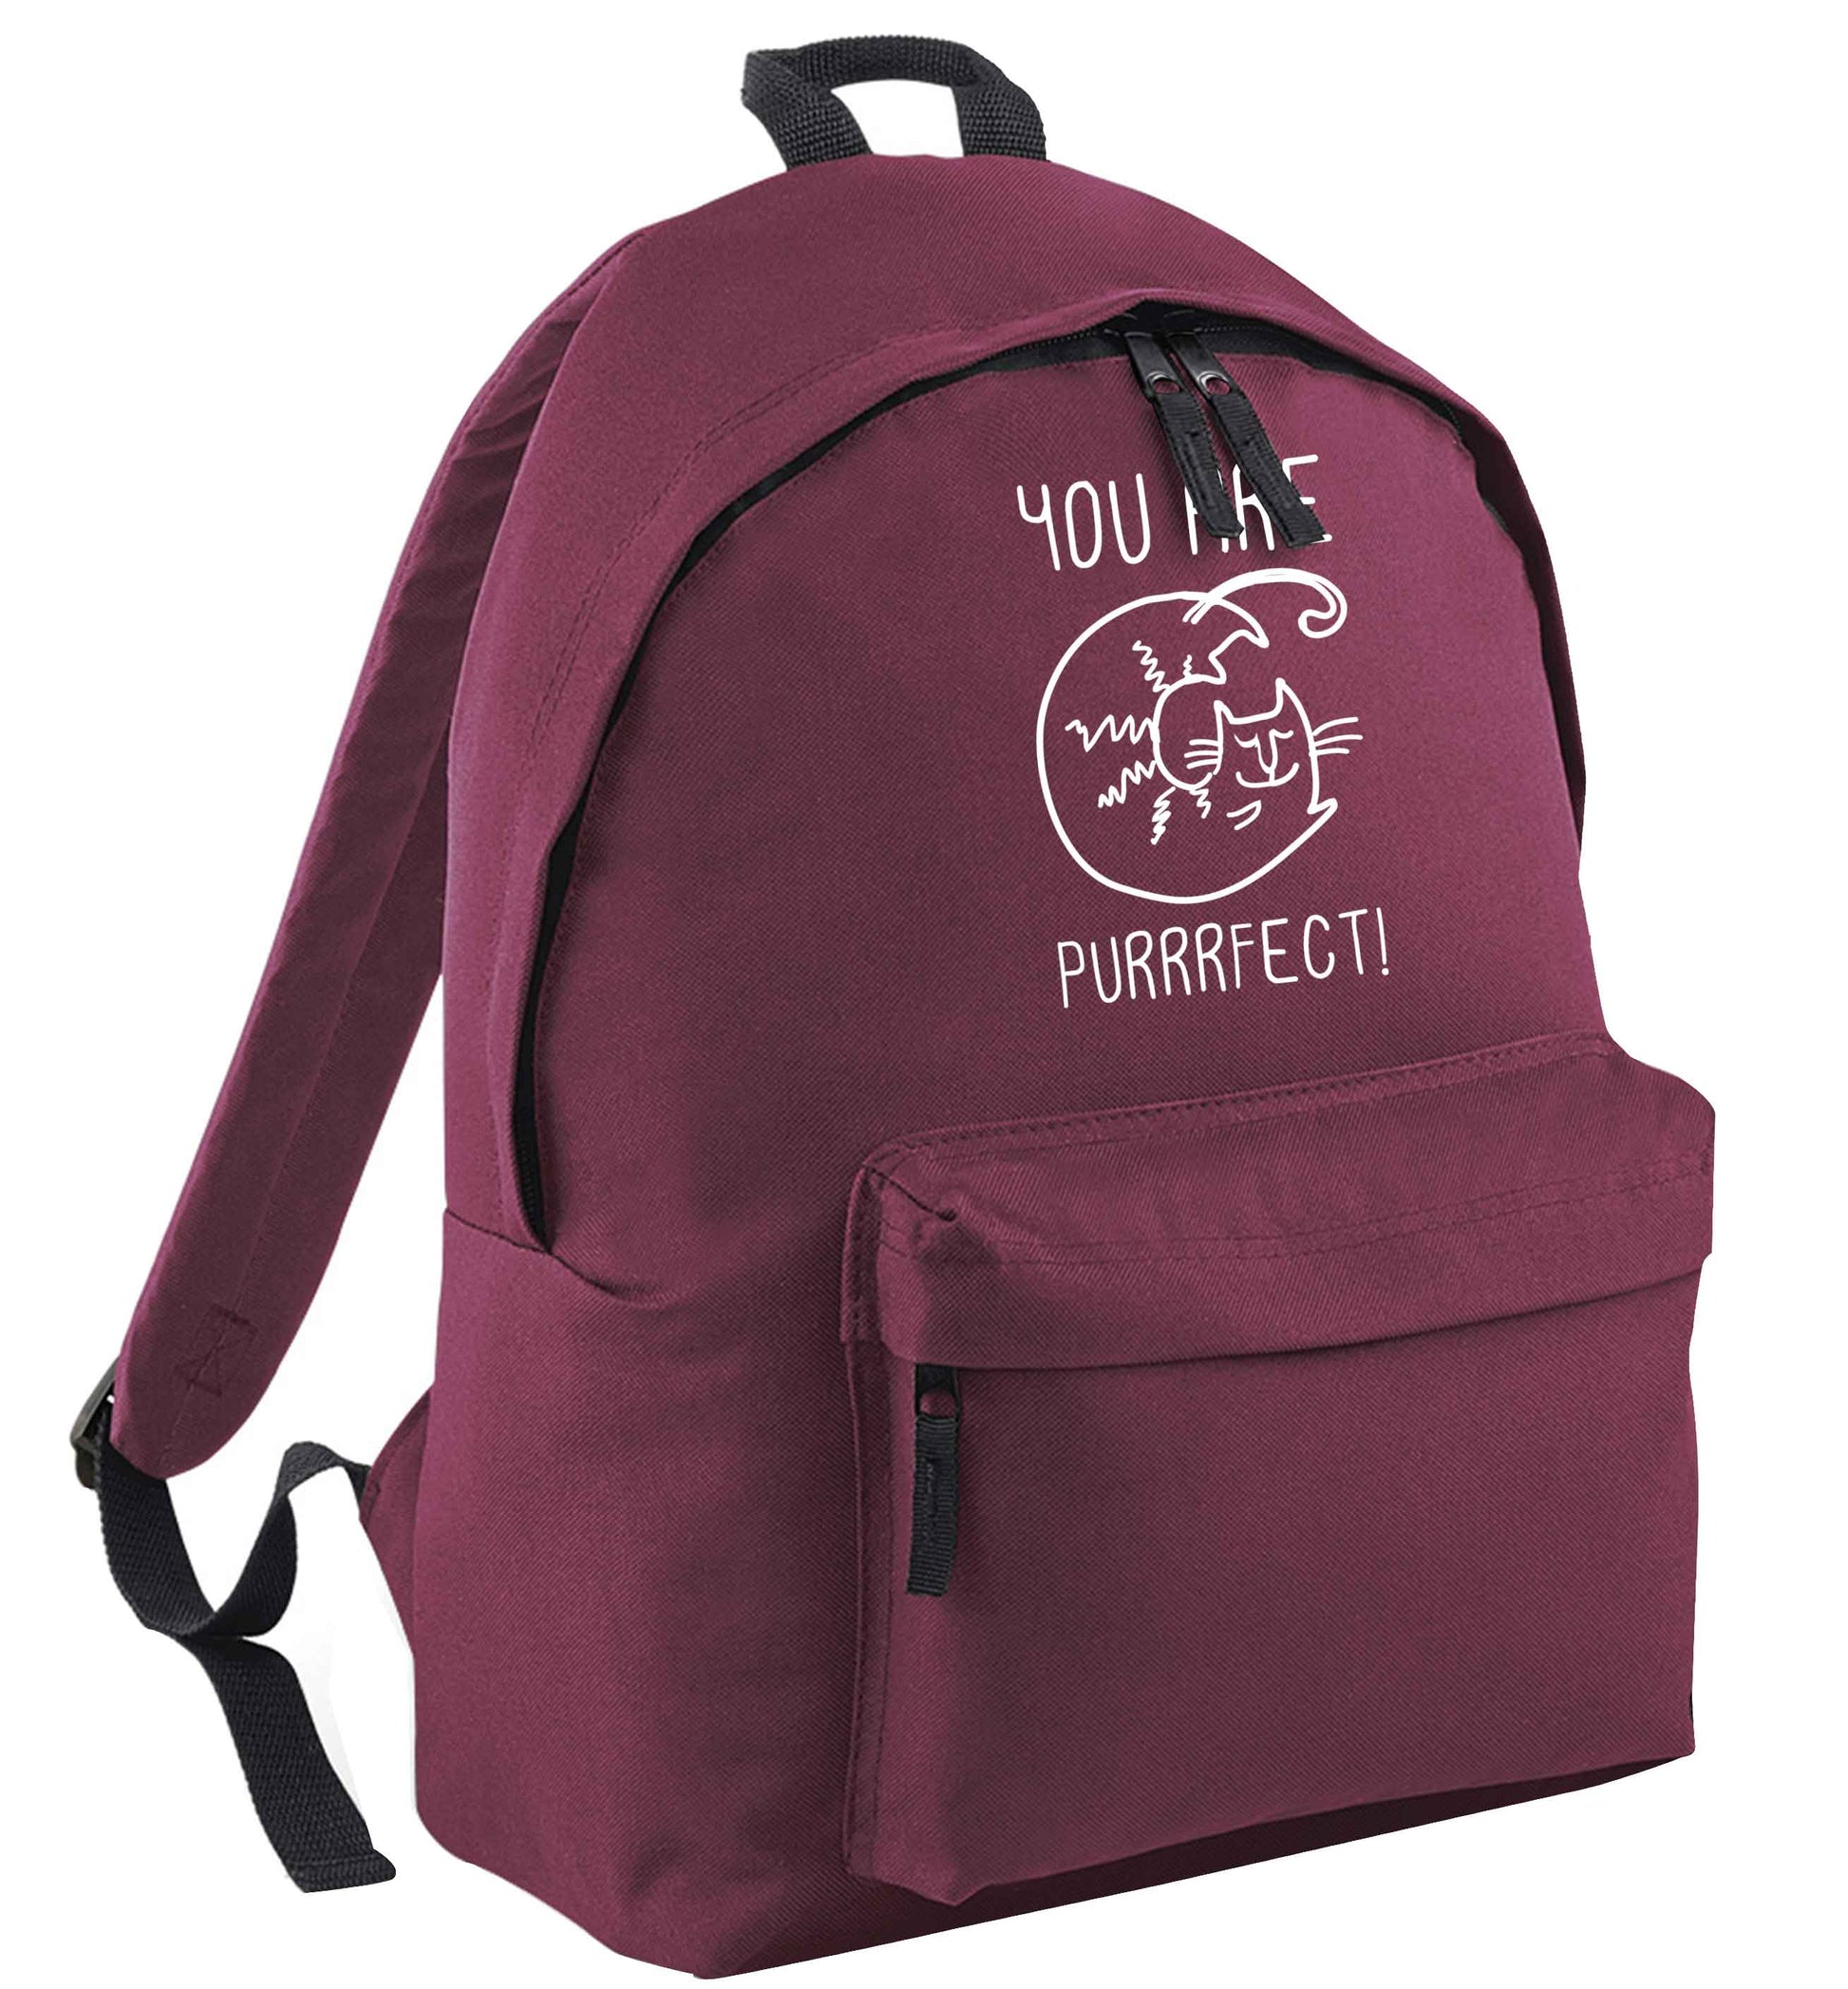 You are purrfect maroon adults backpack